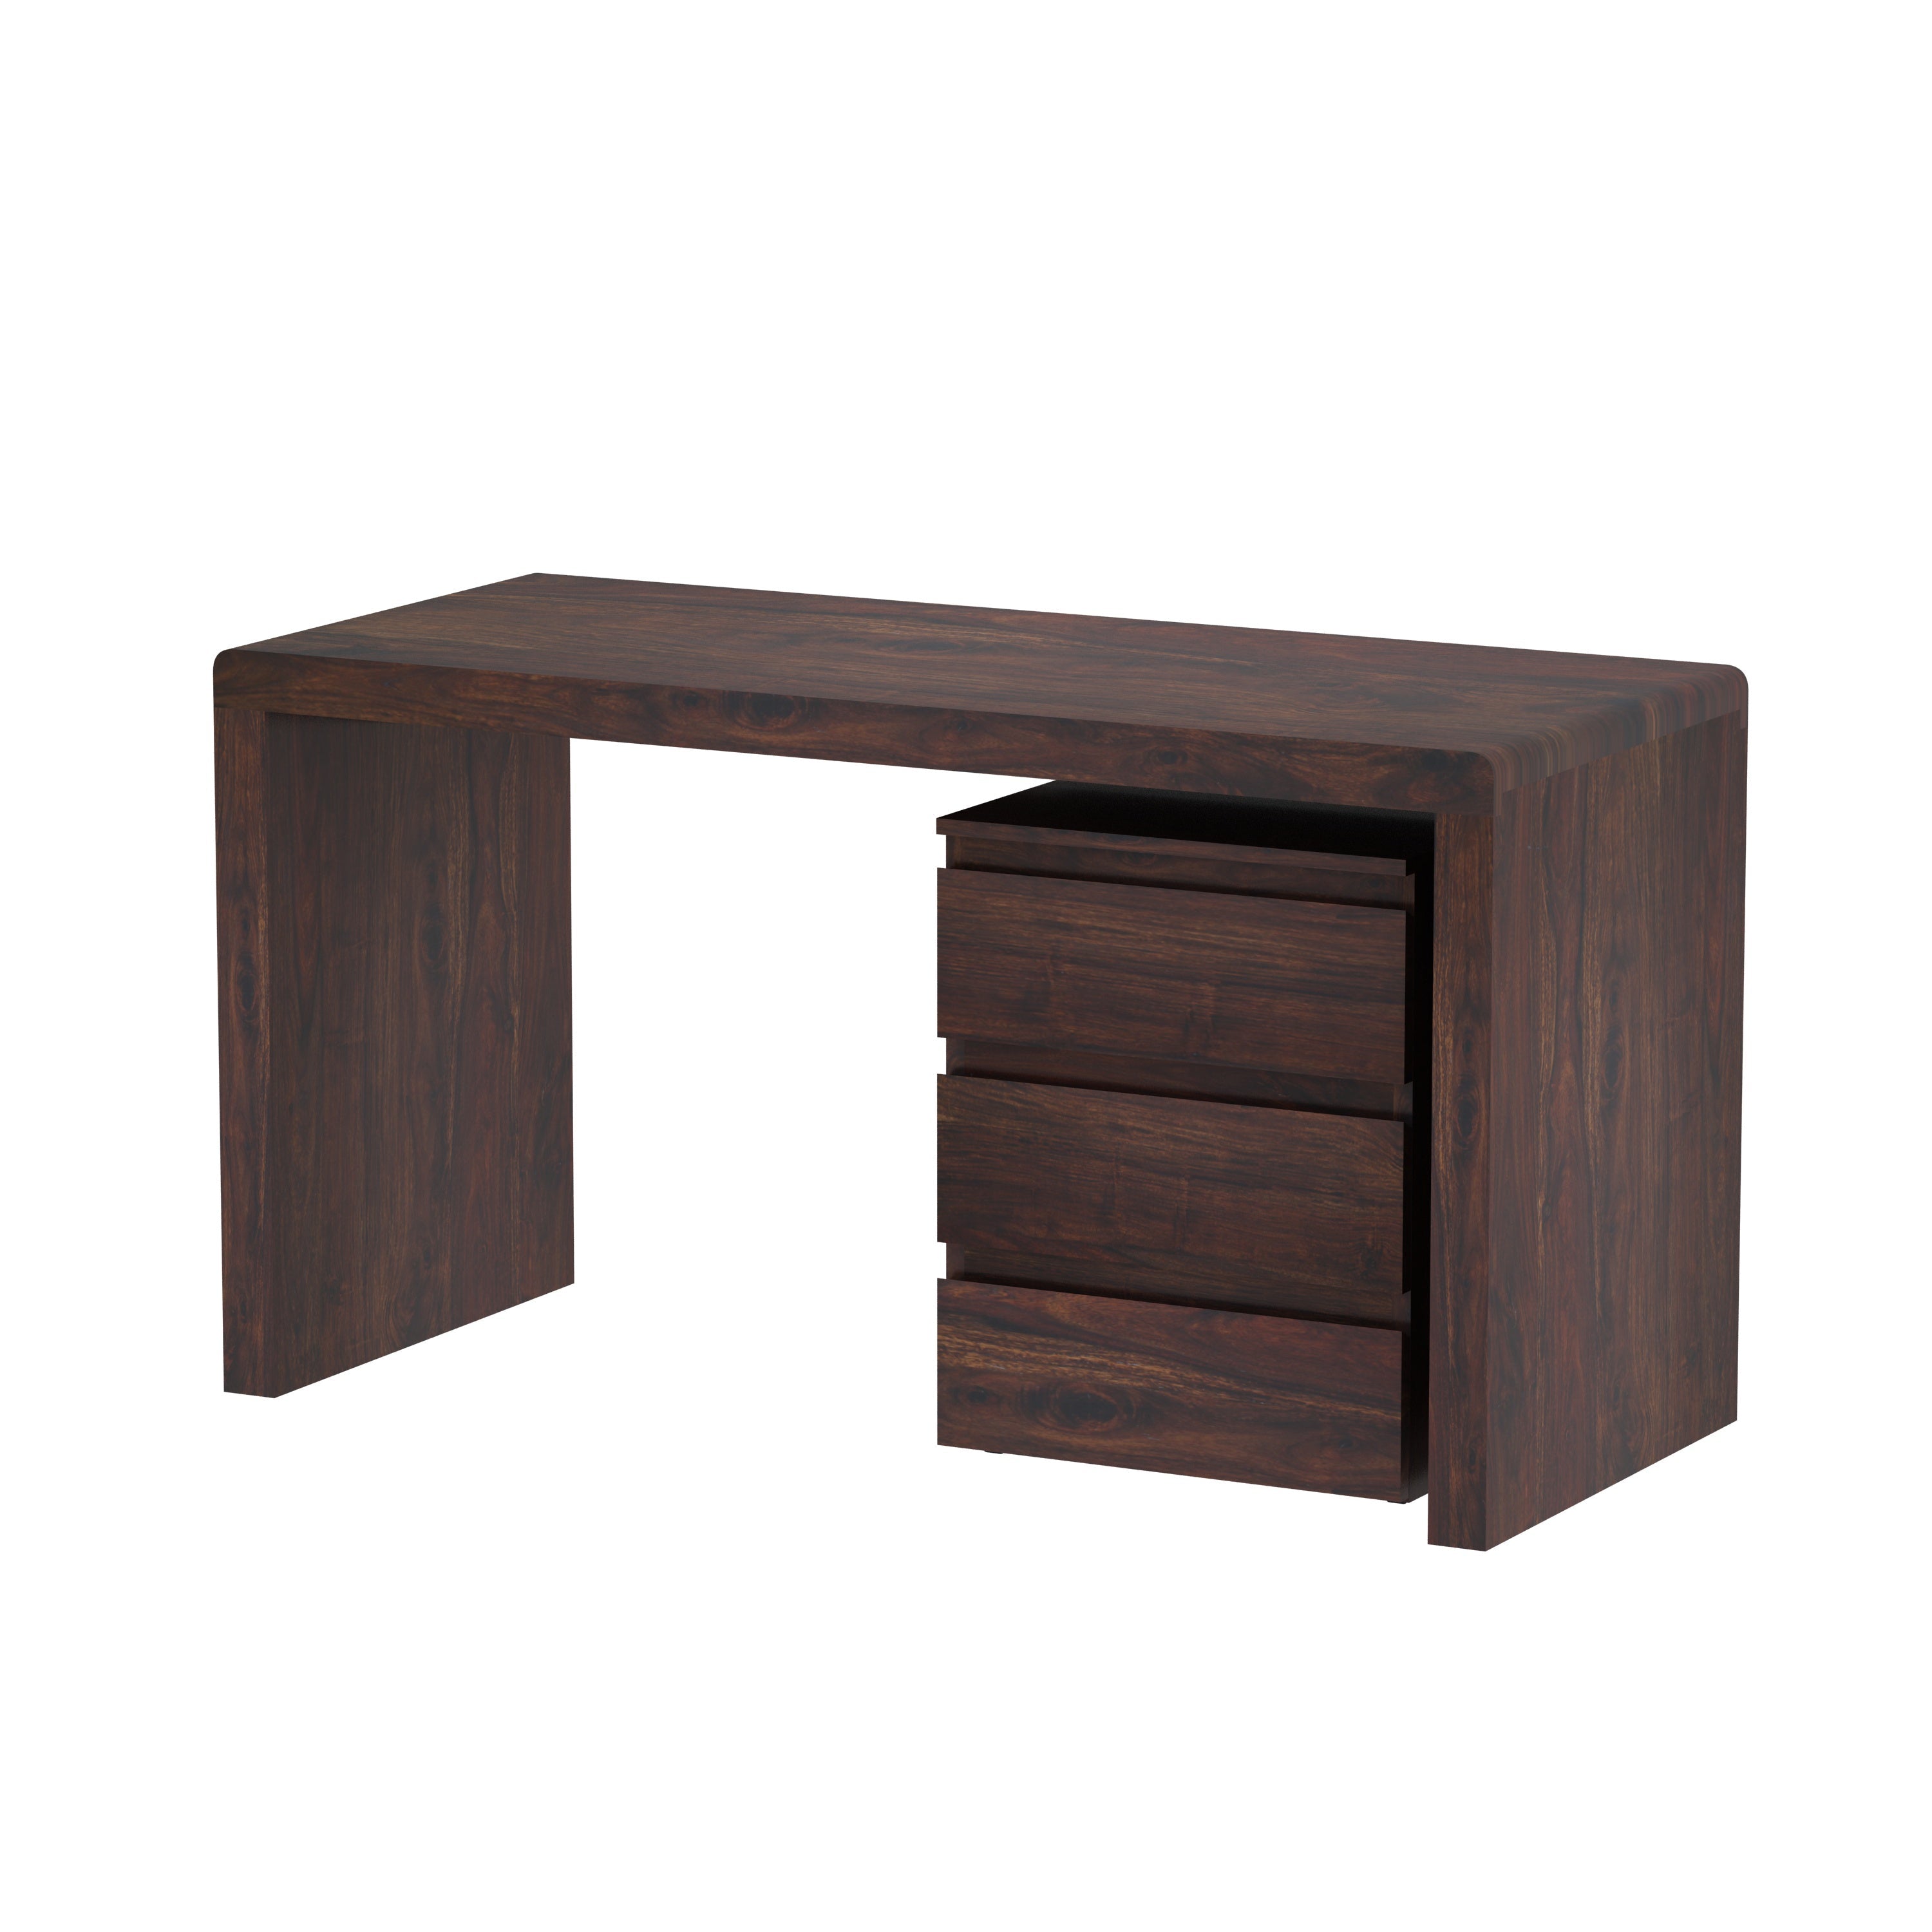 Denzaderb Solid Sheesham Wood Study Table With Movable Chest of Drawers (Walnut Finish)